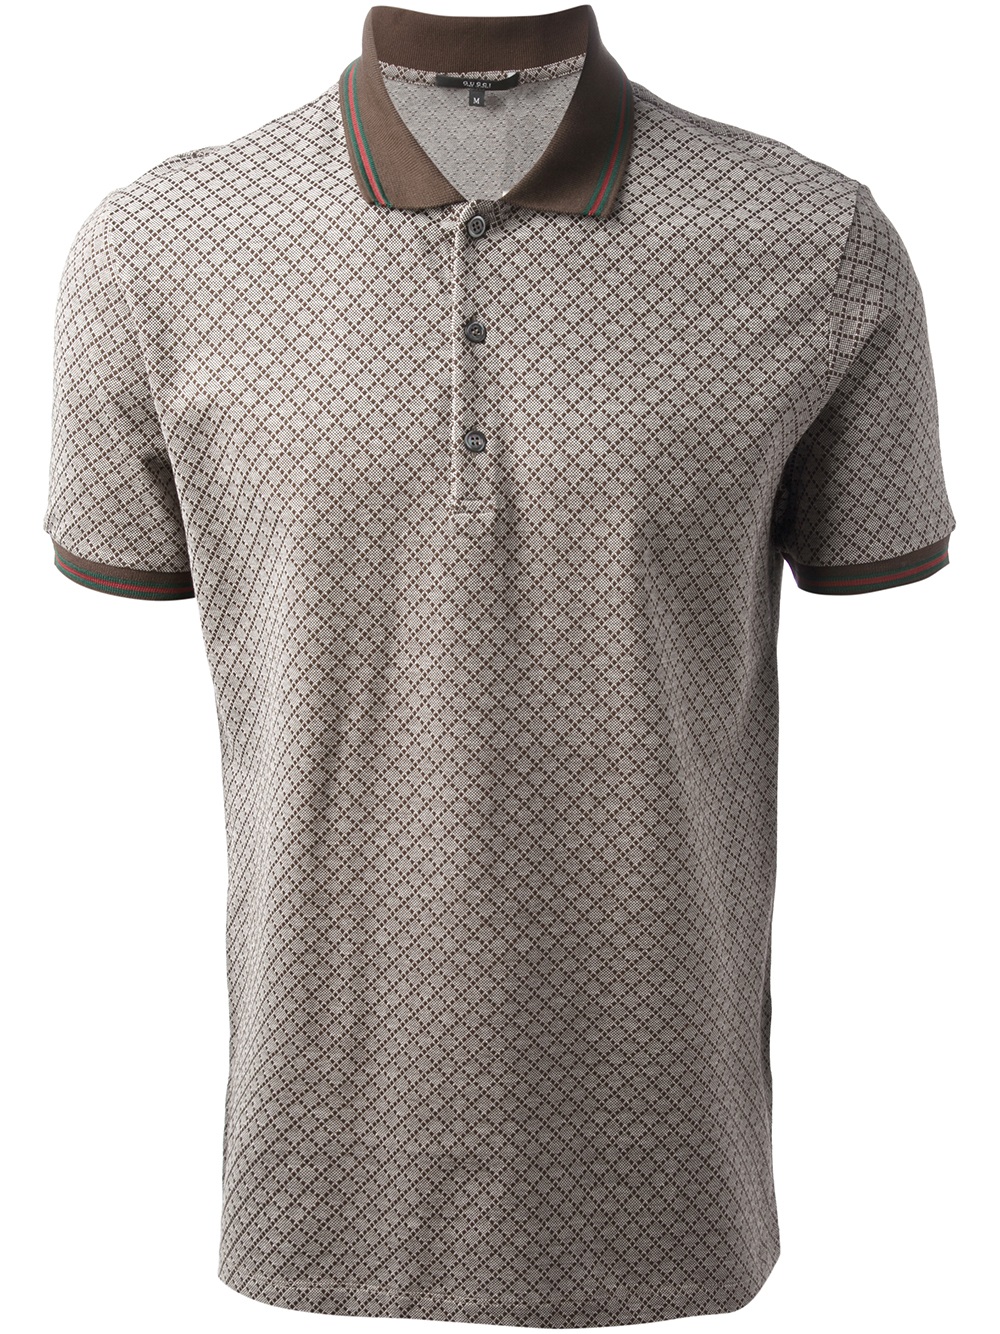 Lyst - Gucci Grid Print Polo Shirt in Brown for Men